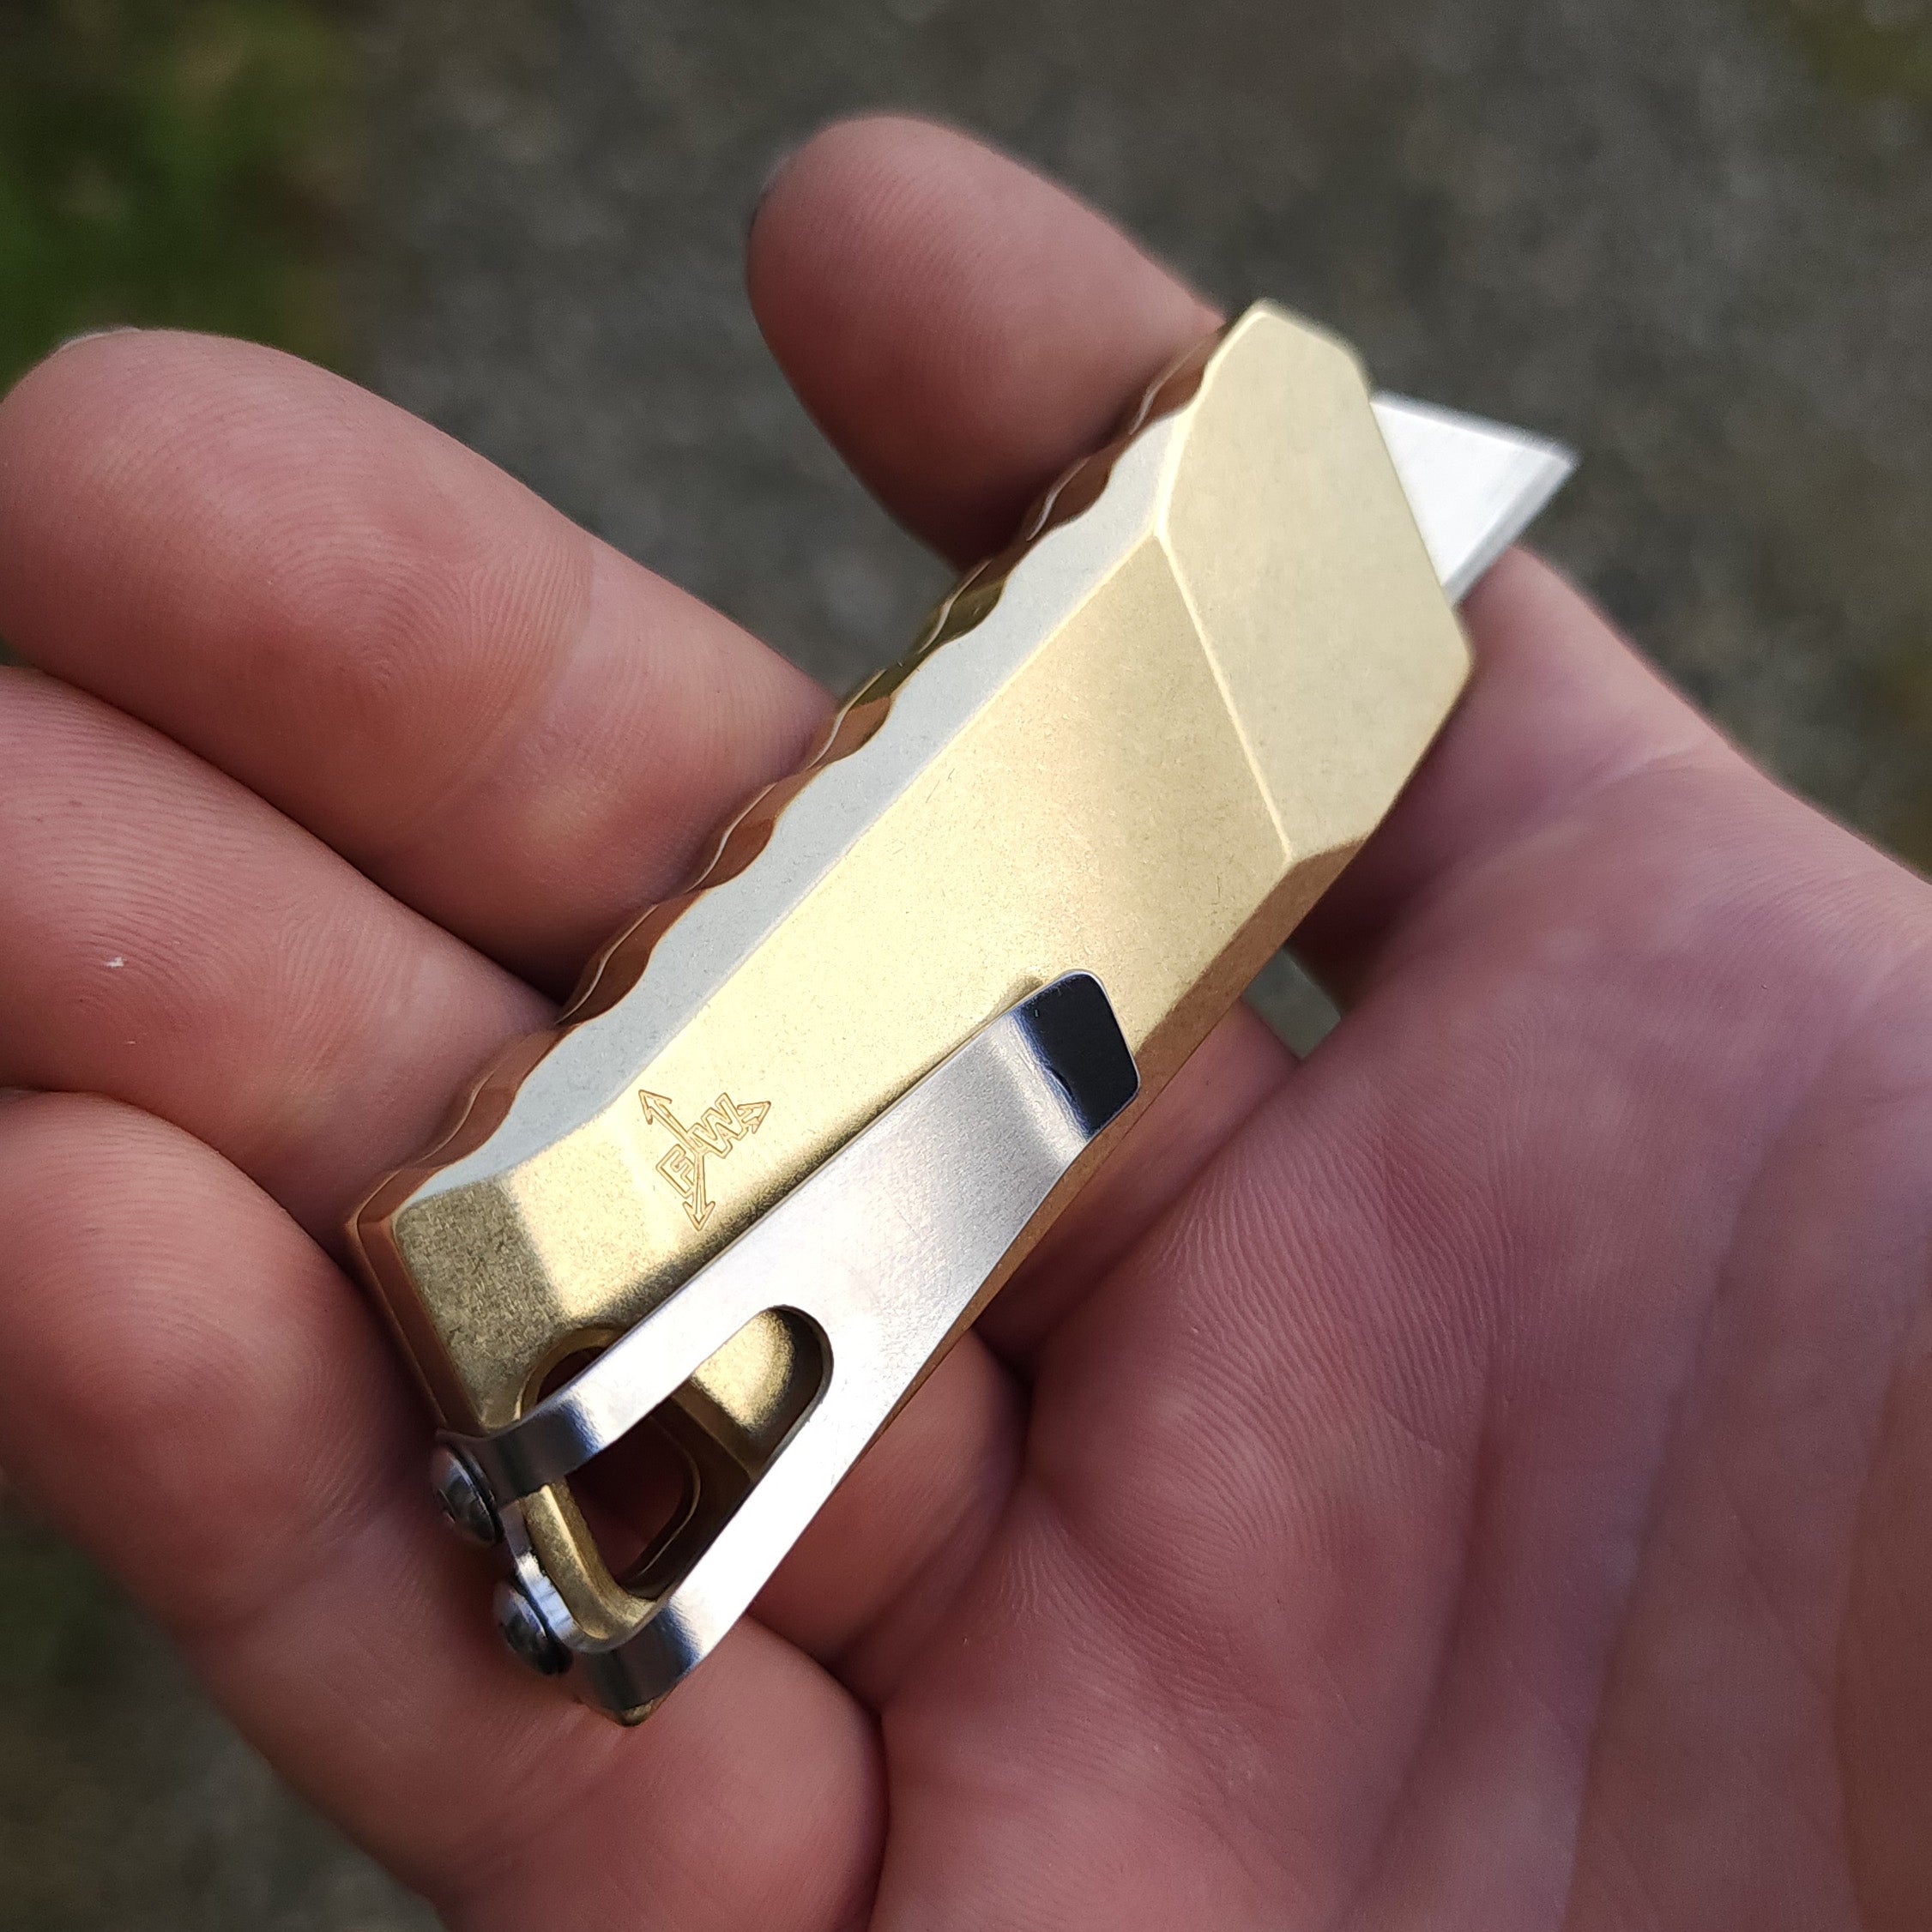 backside of focusworks bob the boxcutter in brass with pocket clip in someones hand